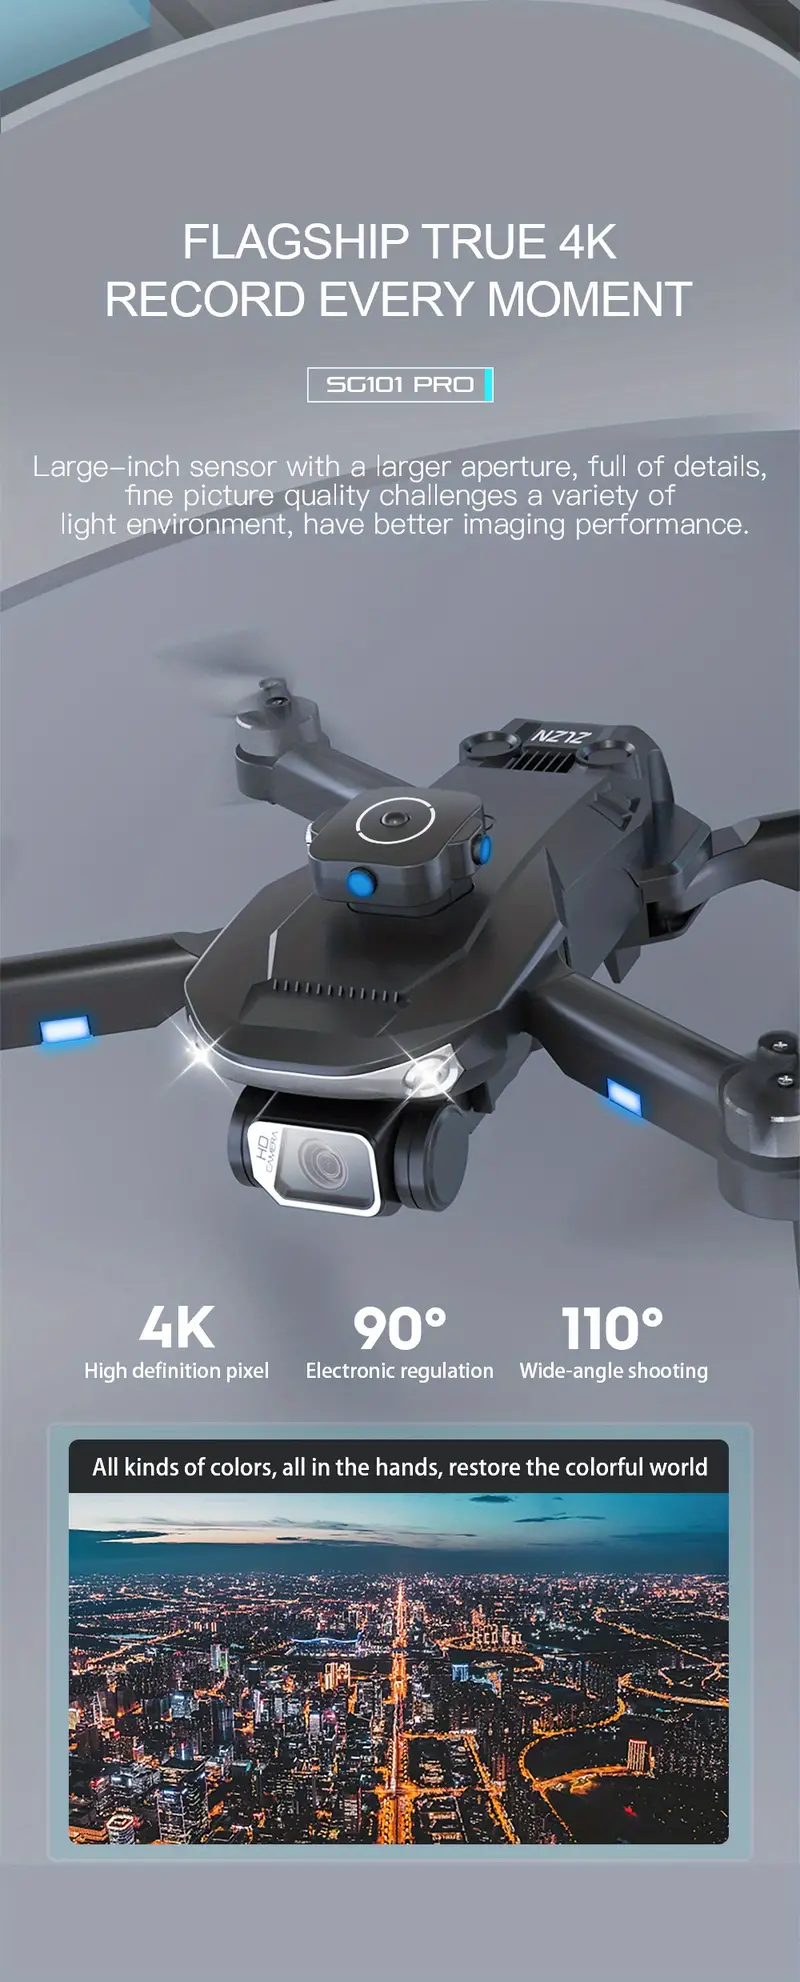 gps drone 360 radar obstacle avoidance brushless motor dual camera with 5g image transmission 4k pixels gps optical flow positioning dual mode details 3